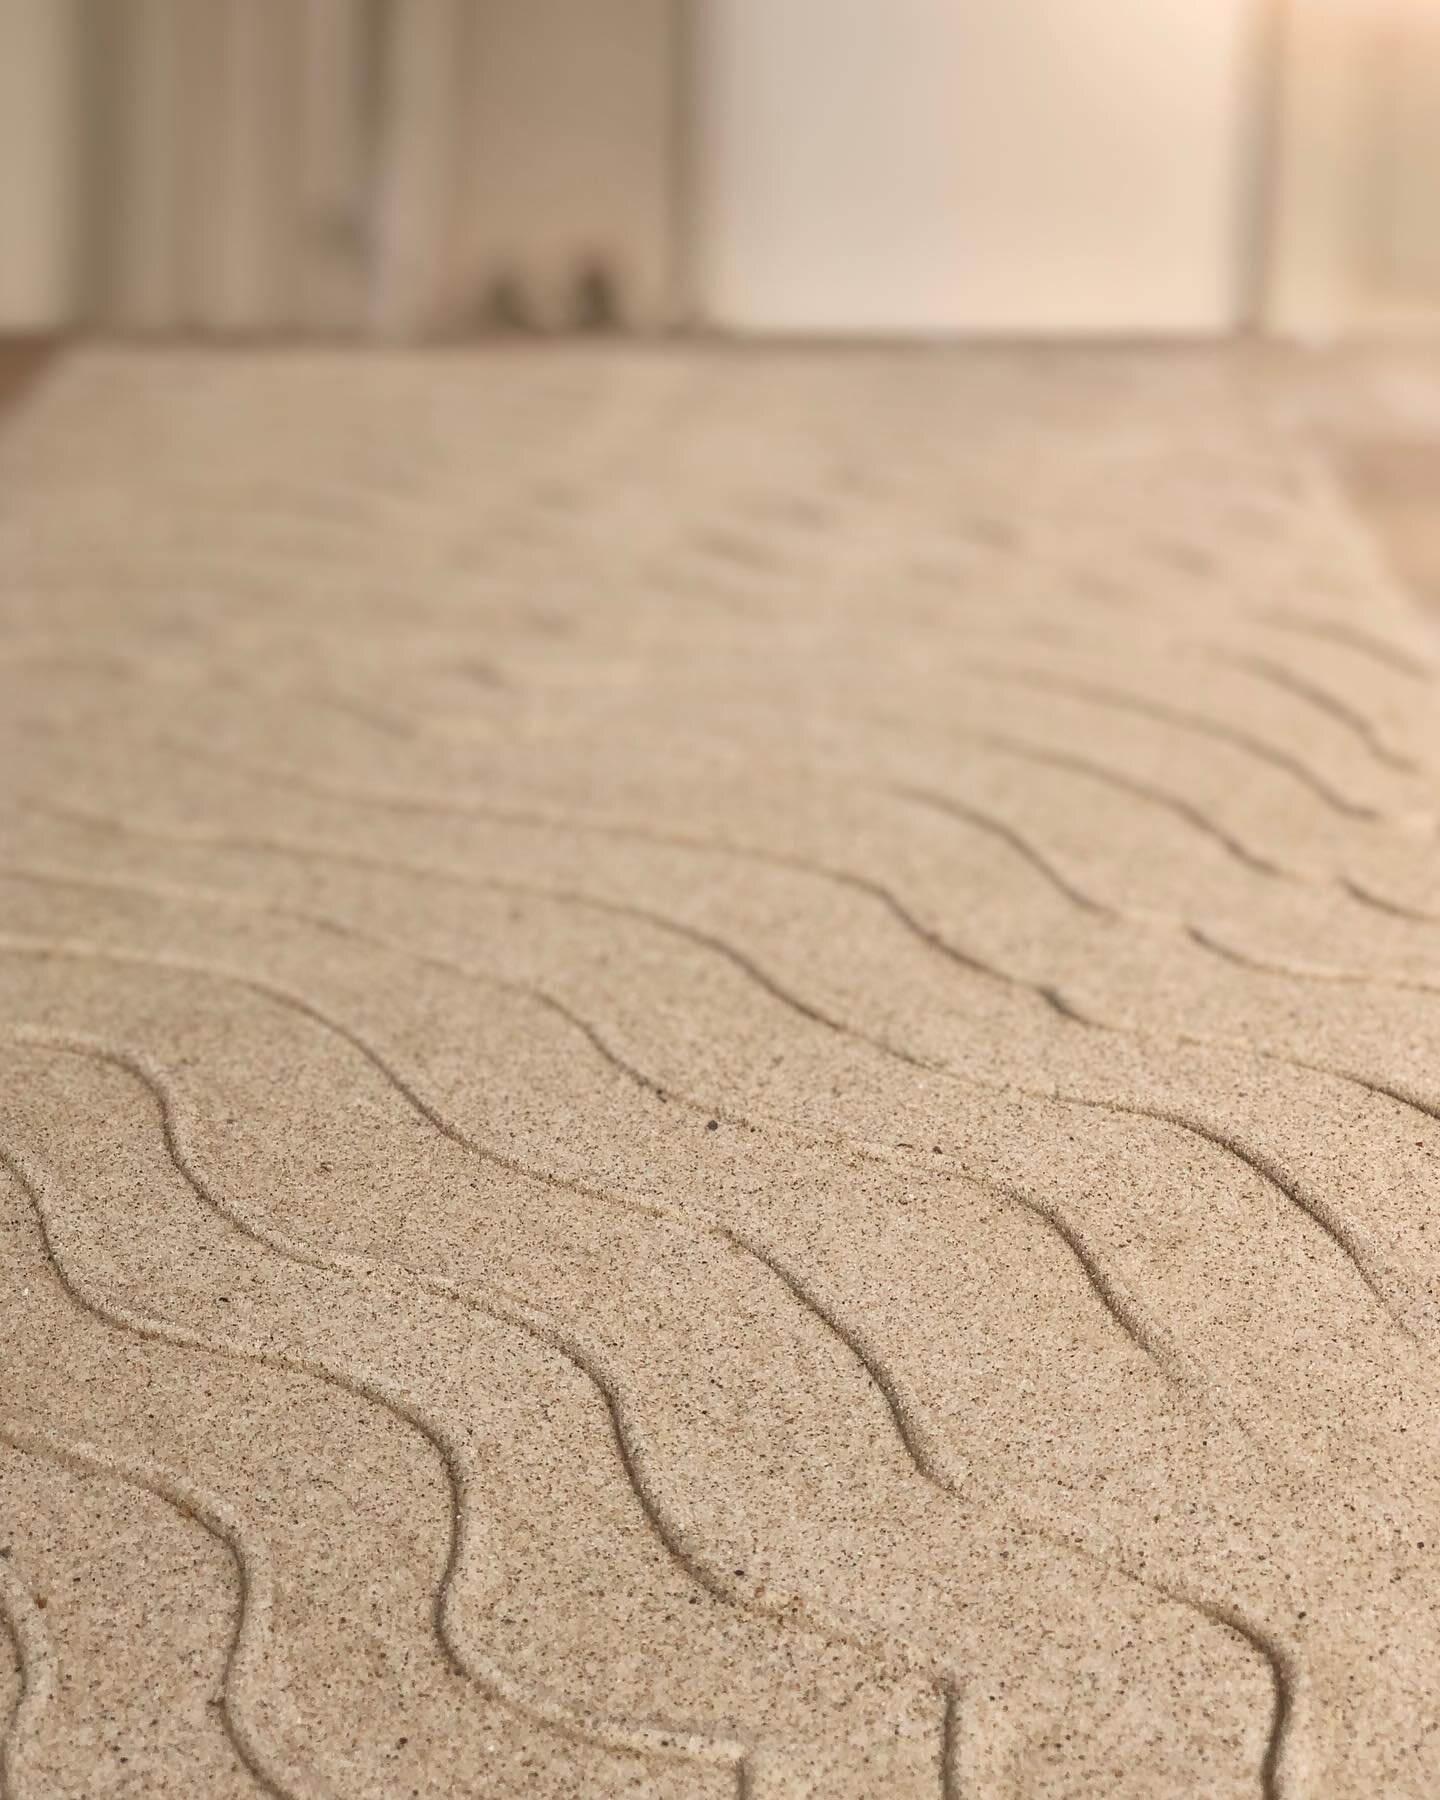 Another &lsquo;Wave&rsquo; piece almost ready. Sandcoated with a warm grey beach sand mixture. Will show the result soon. #zanderover #sandcoated #art #wave #waveyart #interiorinspo #interieurinspiratie #interieur #huisdecoratie